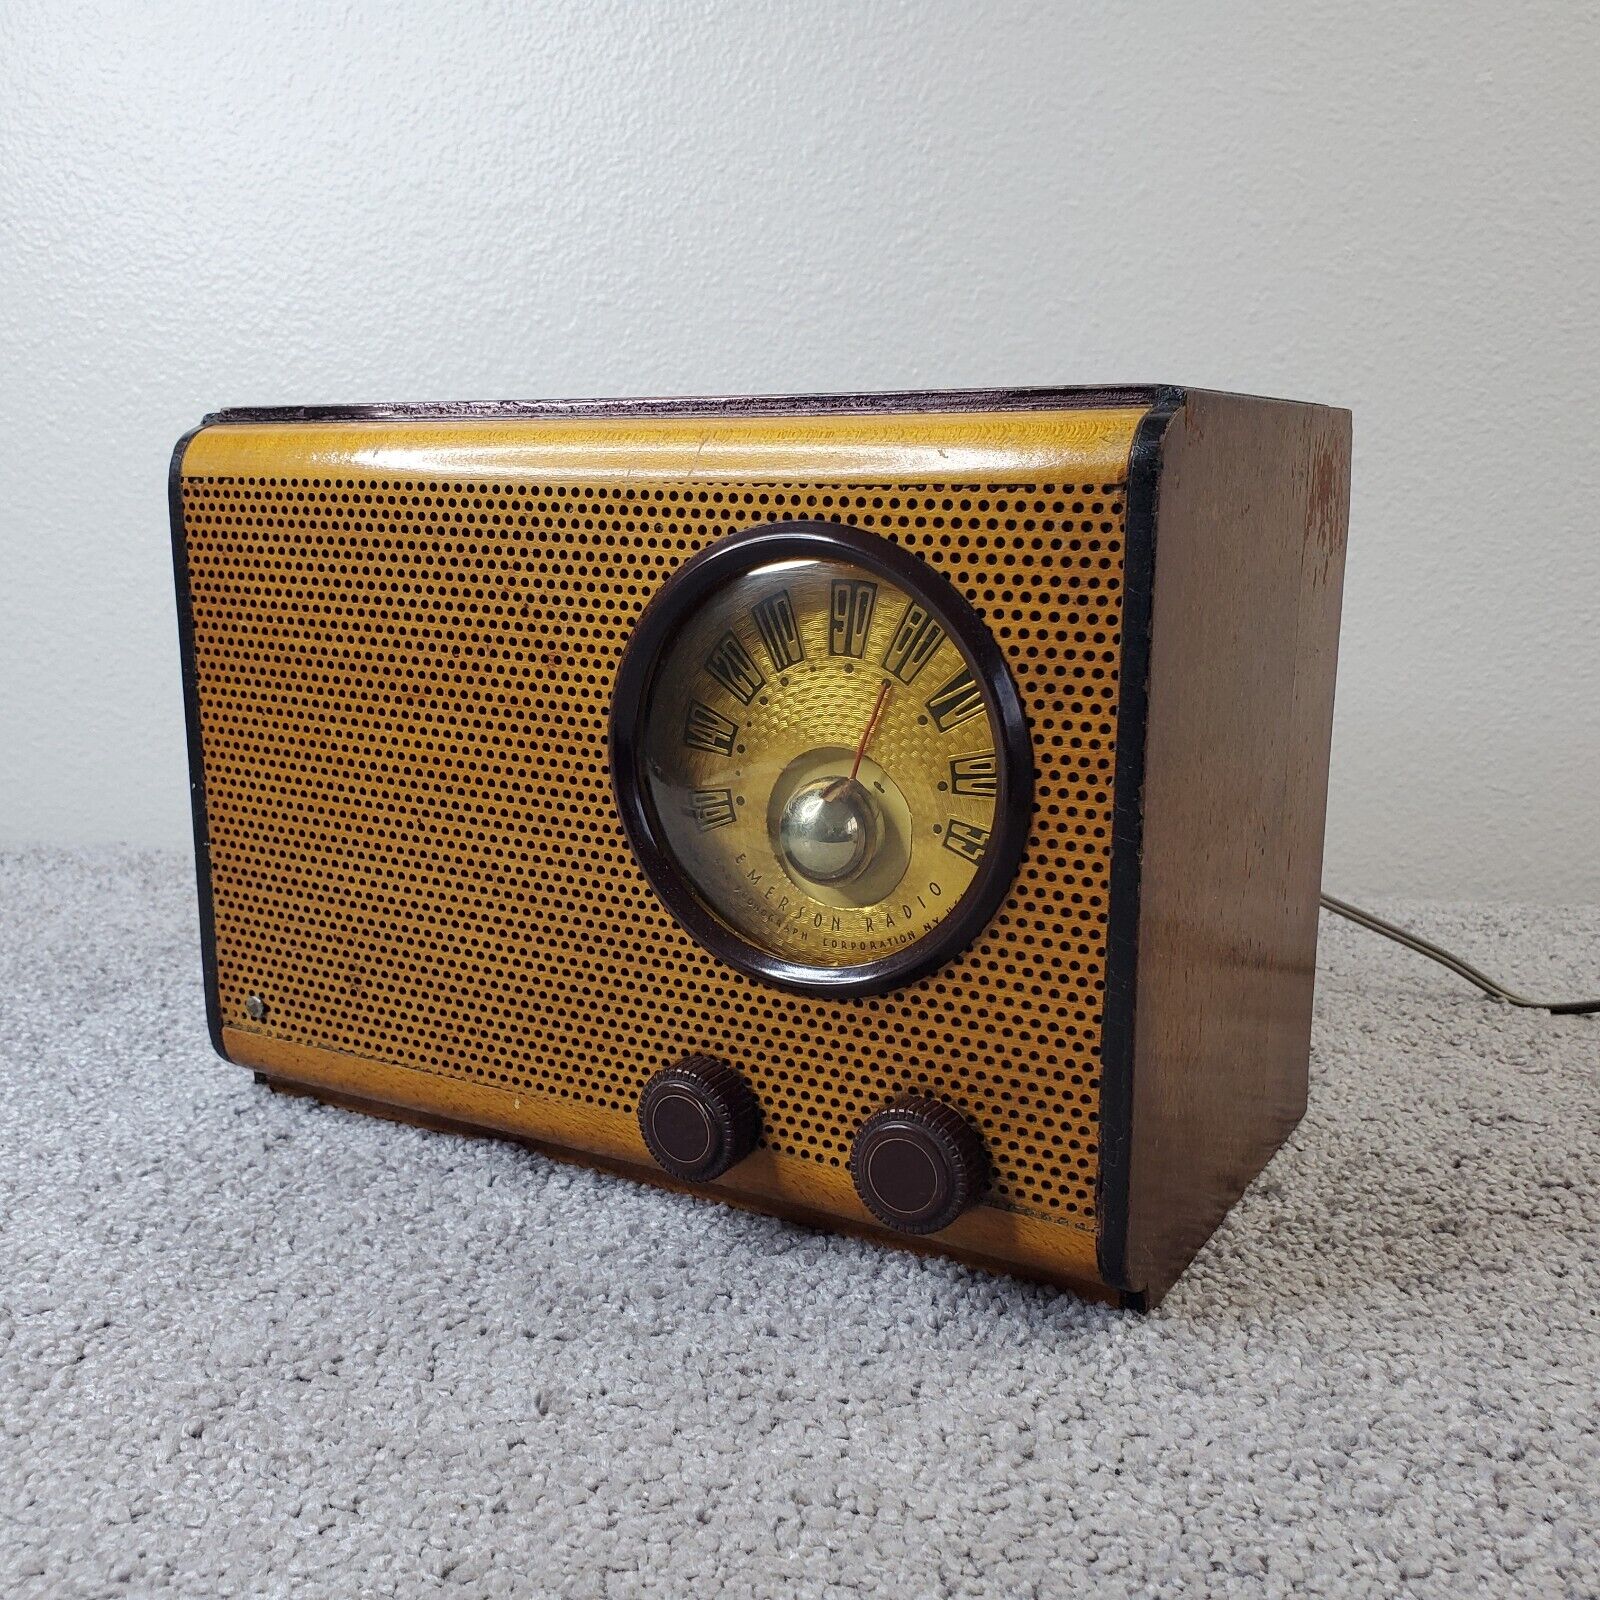 Vintage Emerson Tube Radio Model 503 Wood Cabinet Green Dial 1940's Works